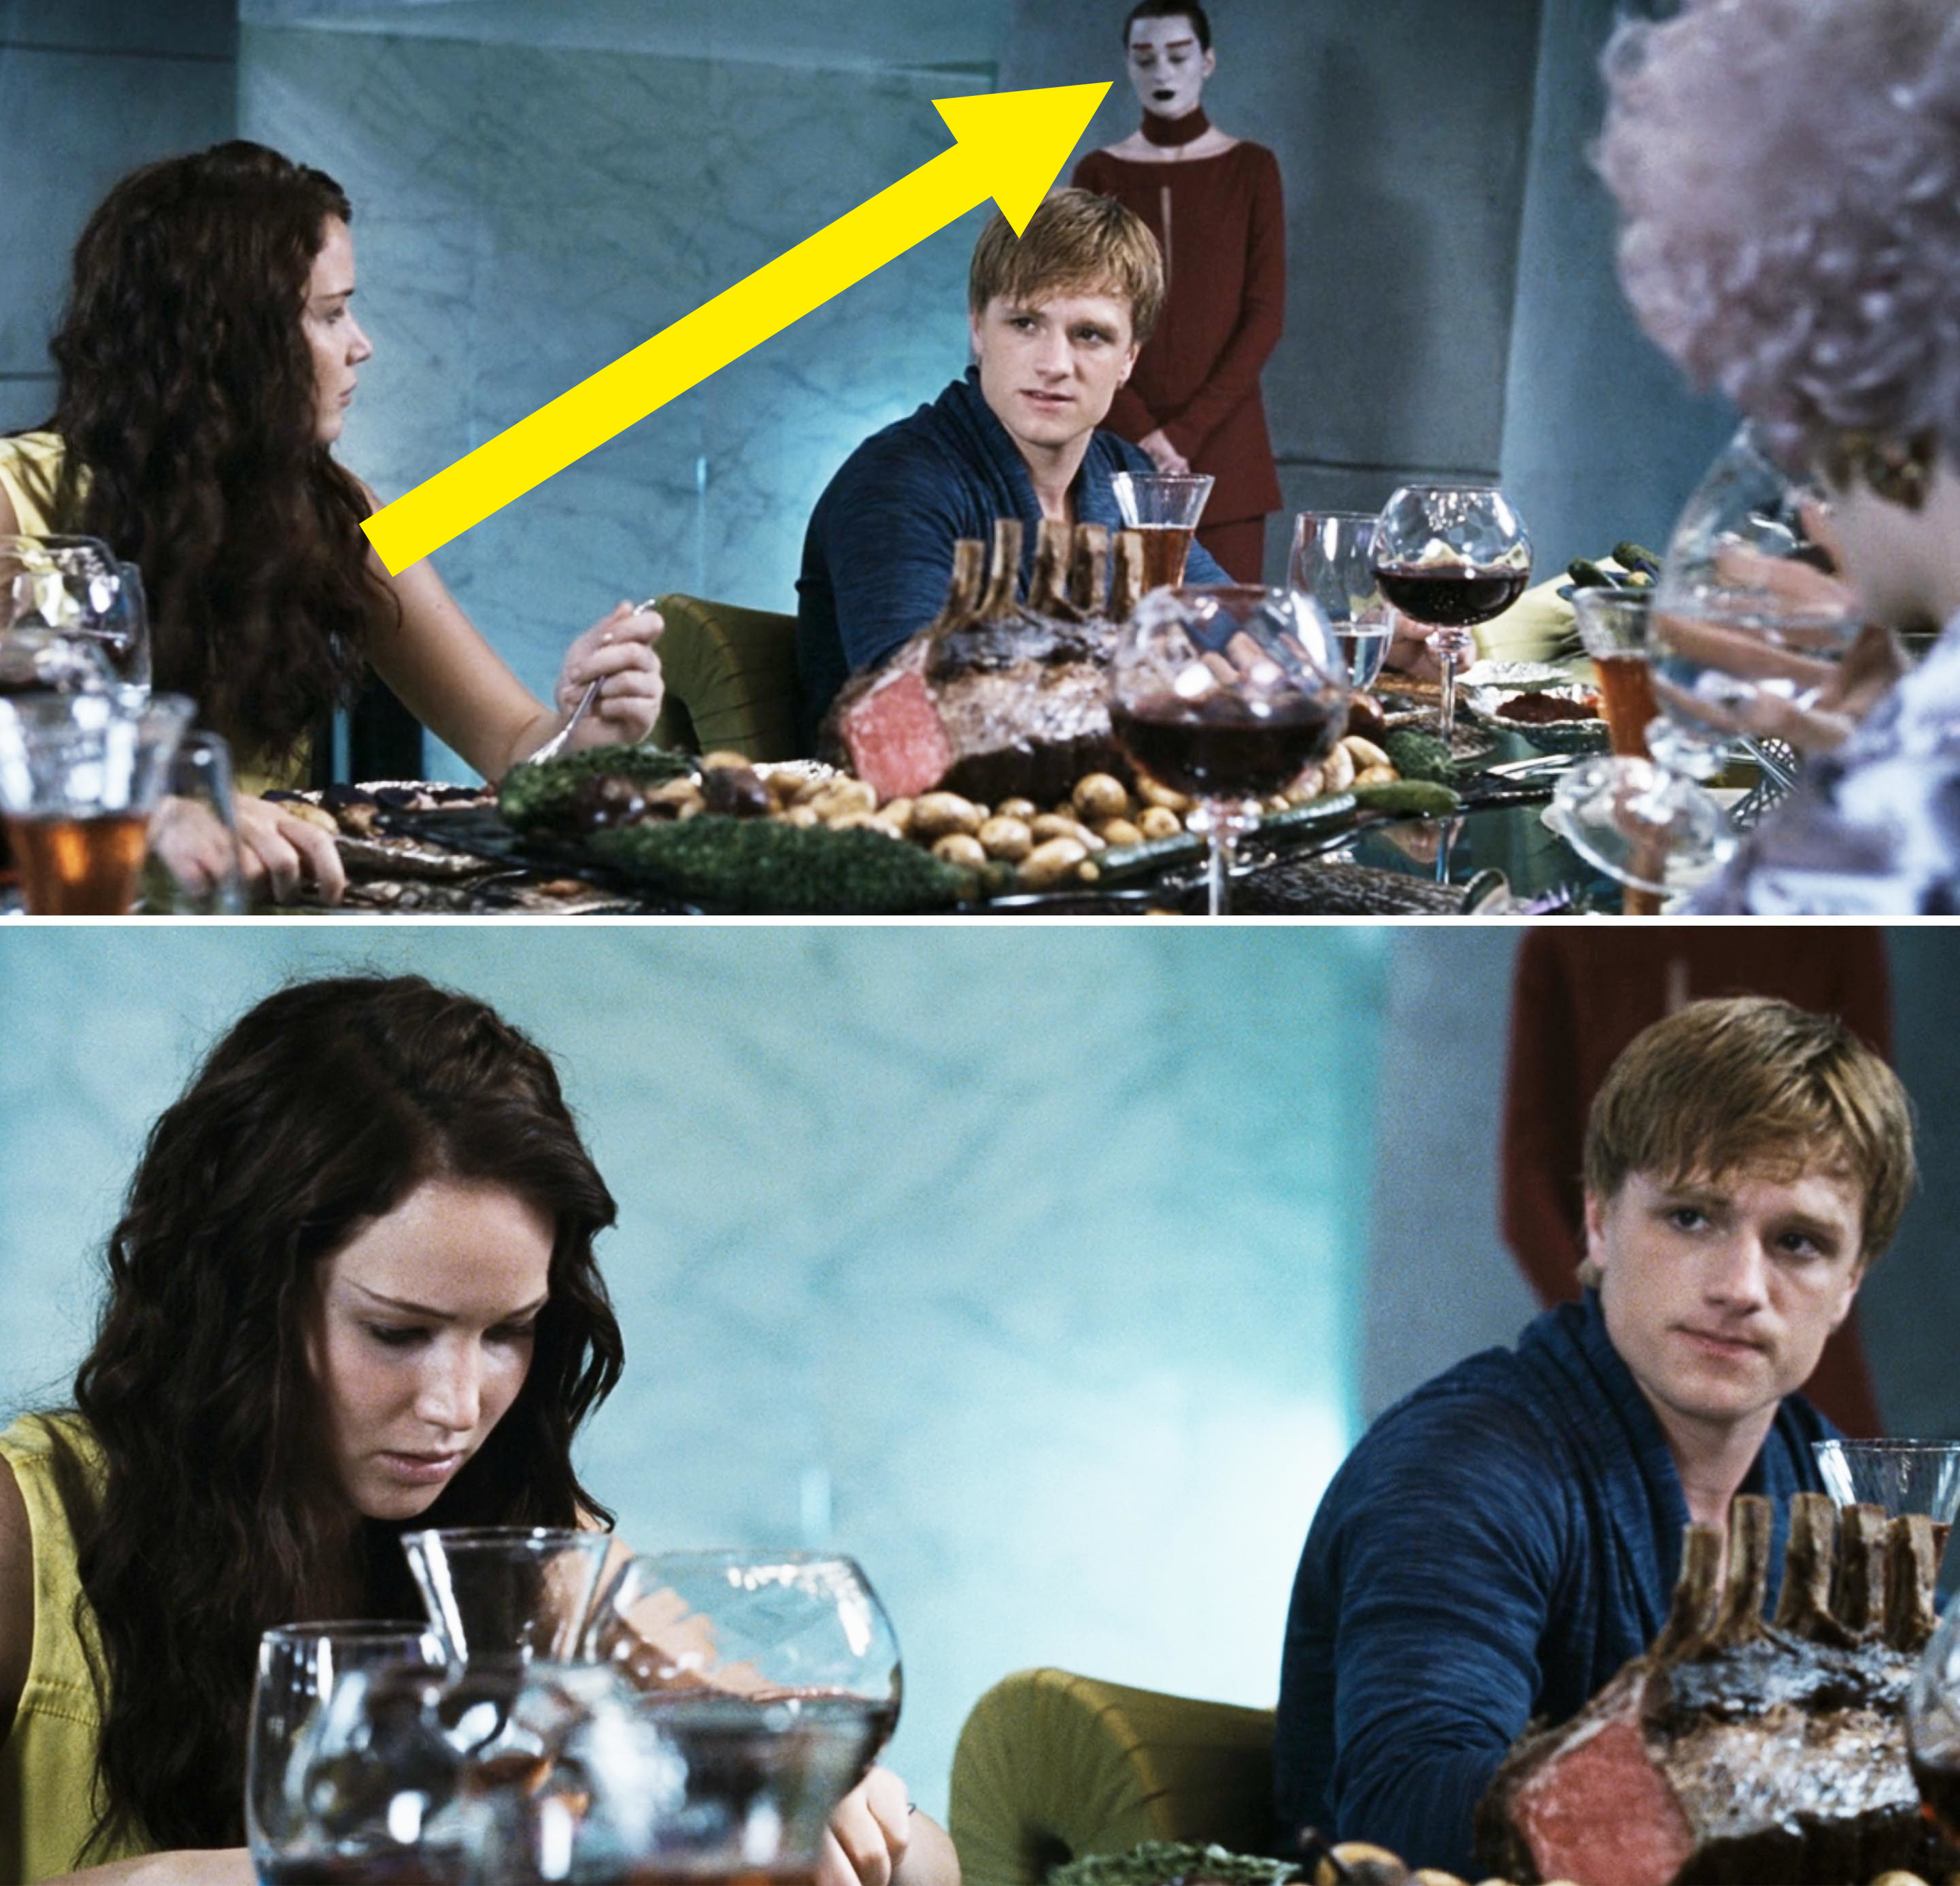 katniss at the dinning table and an arrow pointing to the avox girl standing in the back